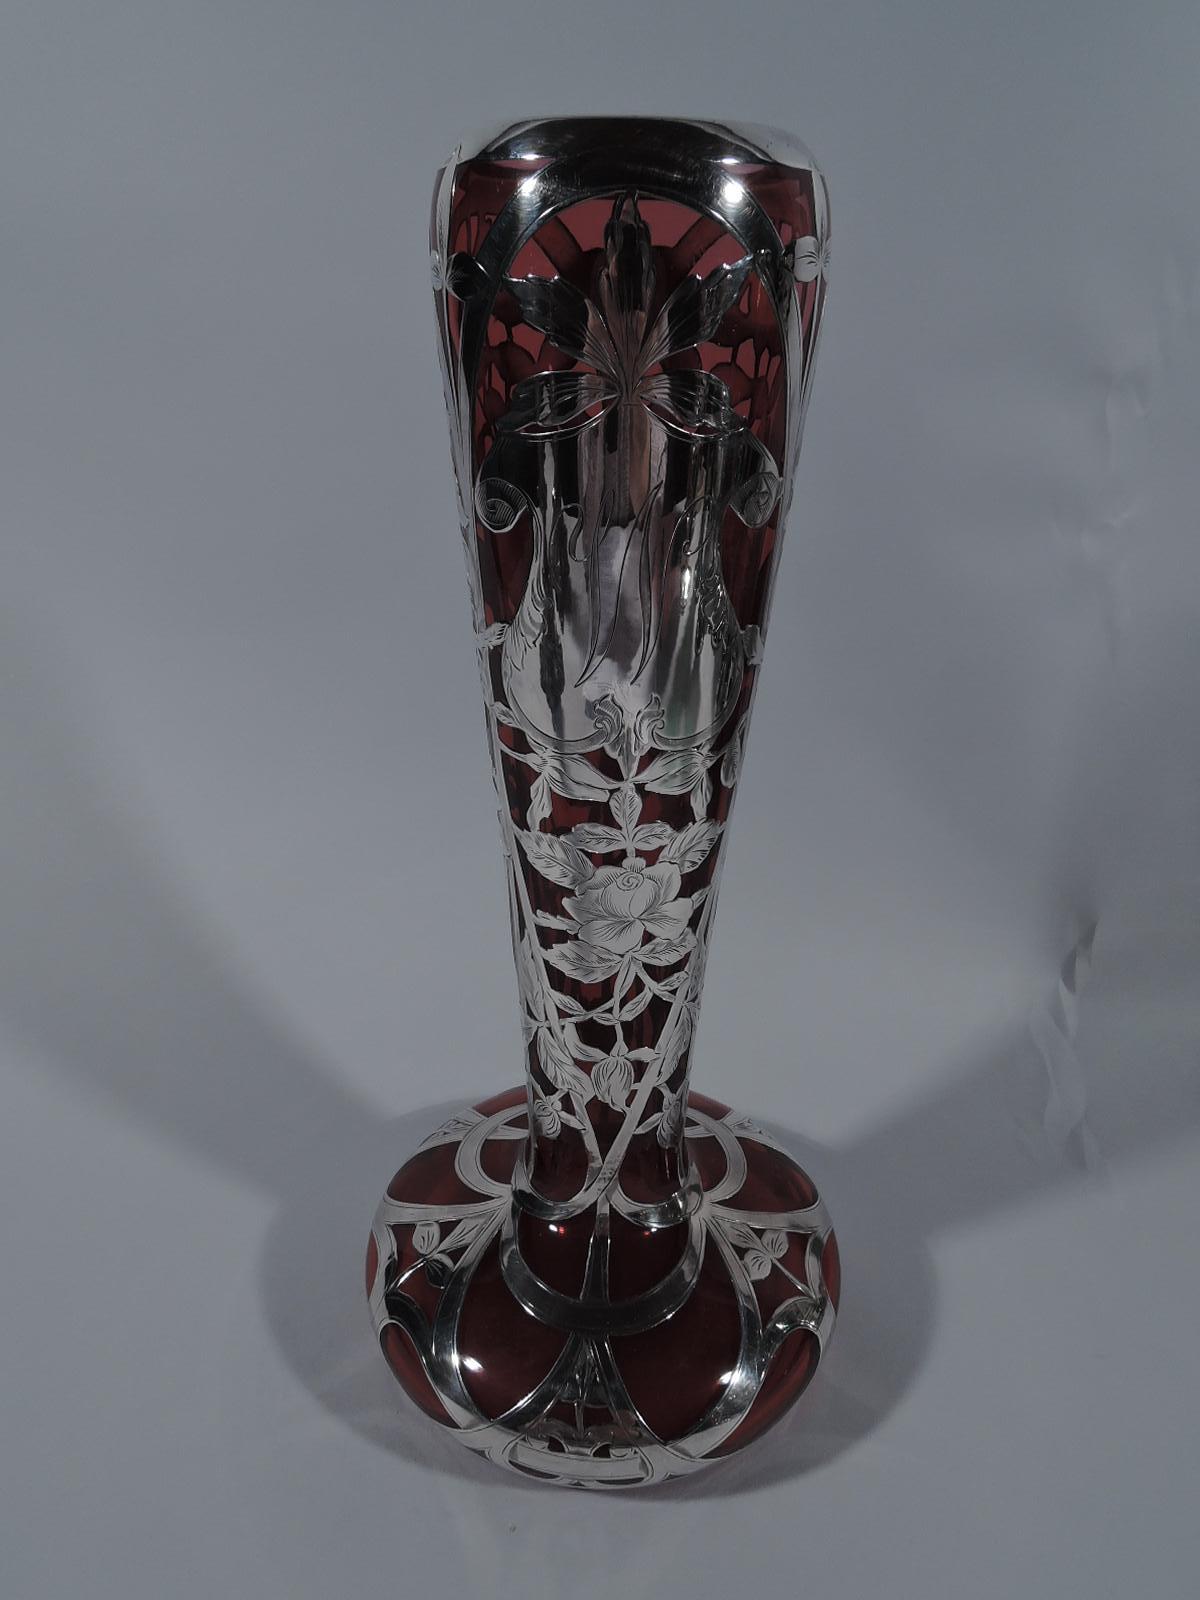 Turn-of-the-century American Art Nouveau red glass vase with silver overlay. Narrow cone and wide and bellied bowl. Engraved overlay in form of flowering rose branch and open scrollwork. Strapwork cartouche engraved with script letter W.